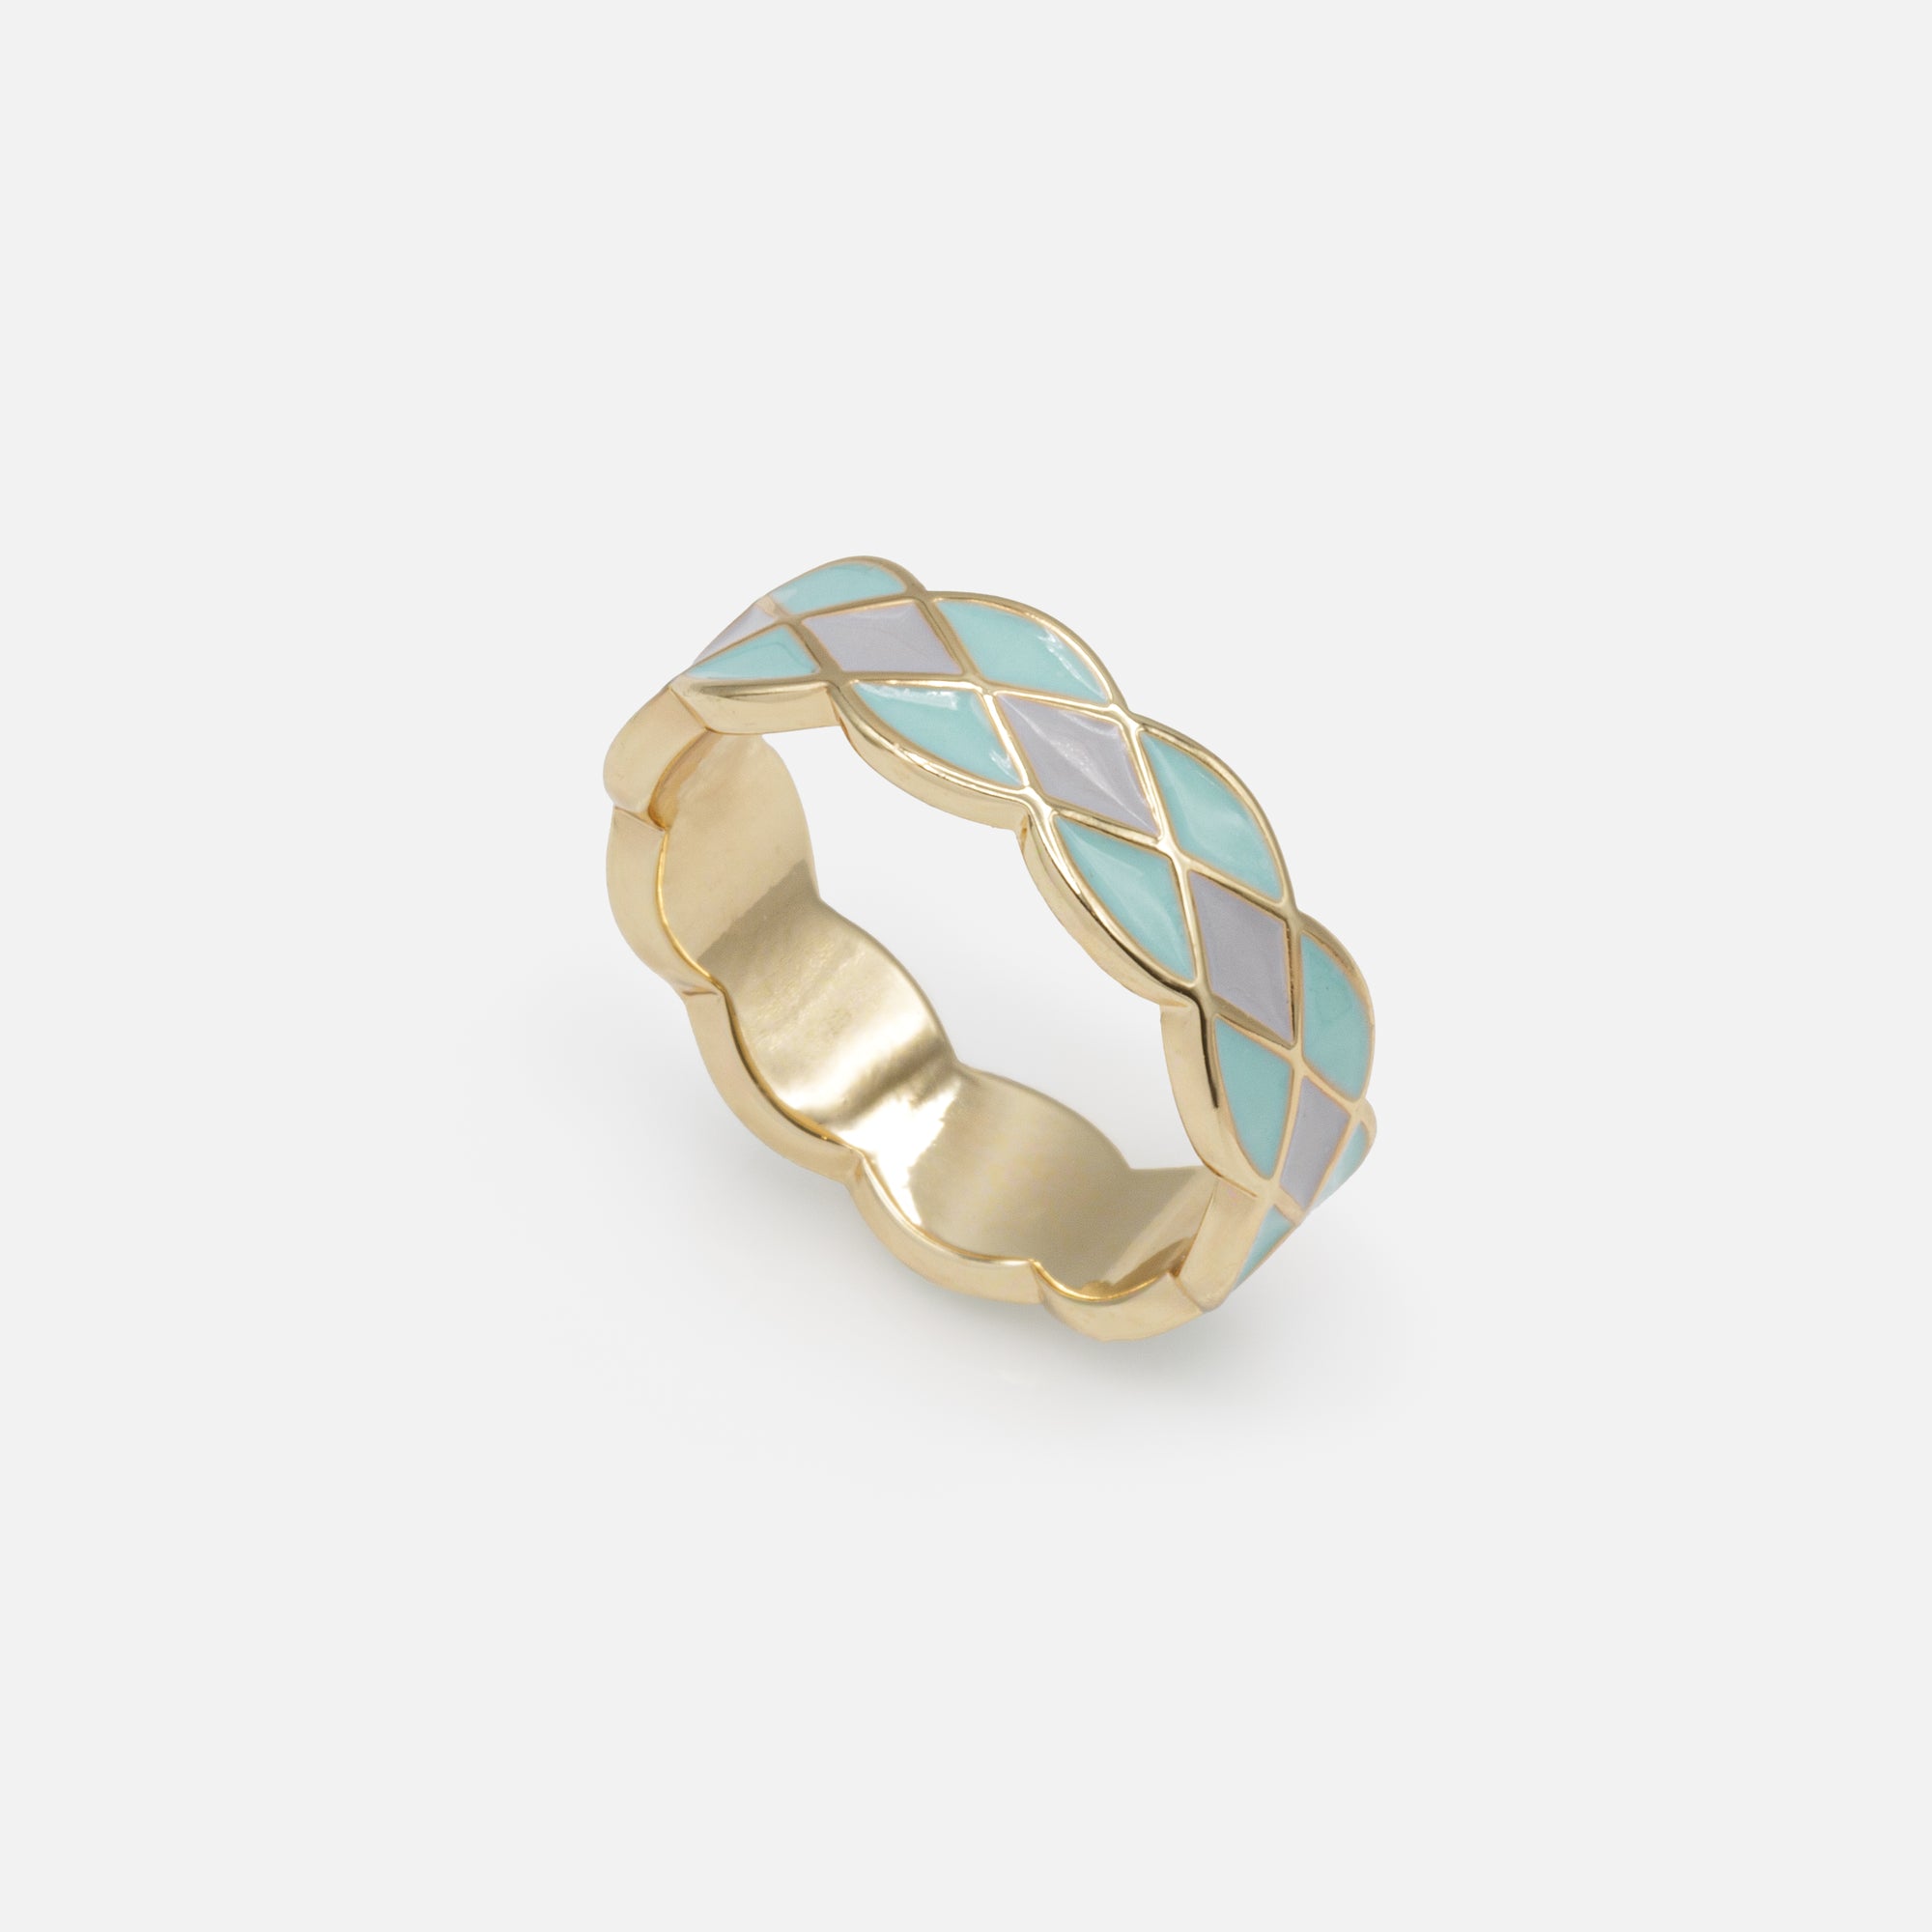 Gold ring with turquoise and pale blue geometric shapes